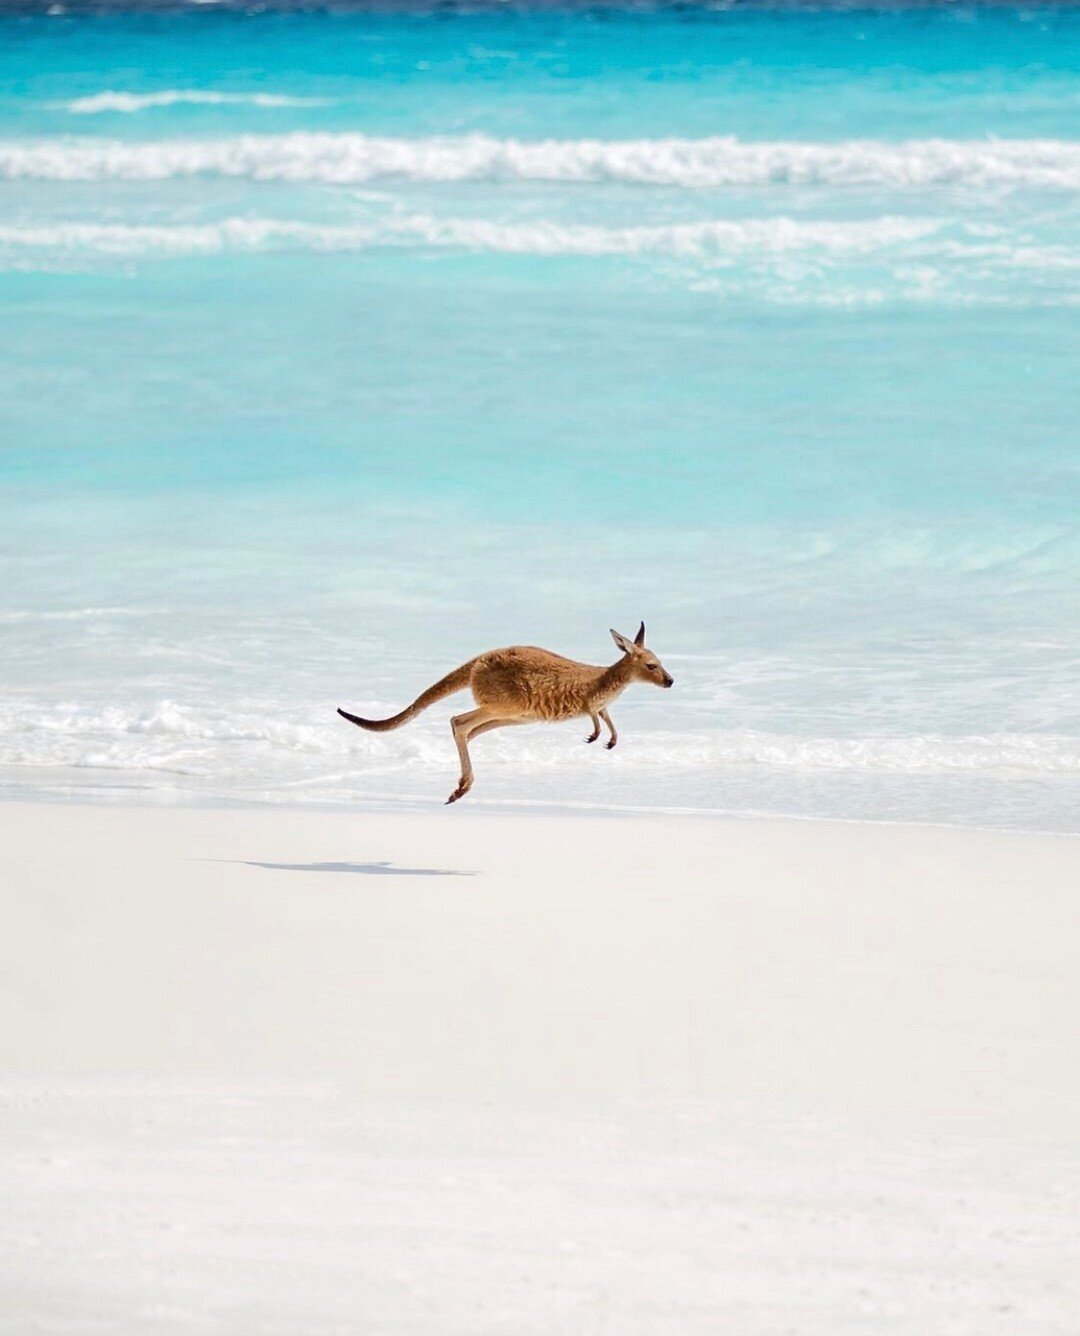 It doesn&rsquo;t get more Australian than this! Bouncing into Christmas like... 🦘 ⠀⠀⠀⠀⠀⠀⠀⠀⠀
⠀⠀⠀⠀⠀⠀⠀⠀⠀
Love this shot by @ospreycreative, taken at Lucky Bay in Esperance. Such a stunning beach with plenty of friendly locals to come and say hi!⠀⠀⠀⠀⠀⠀⠀